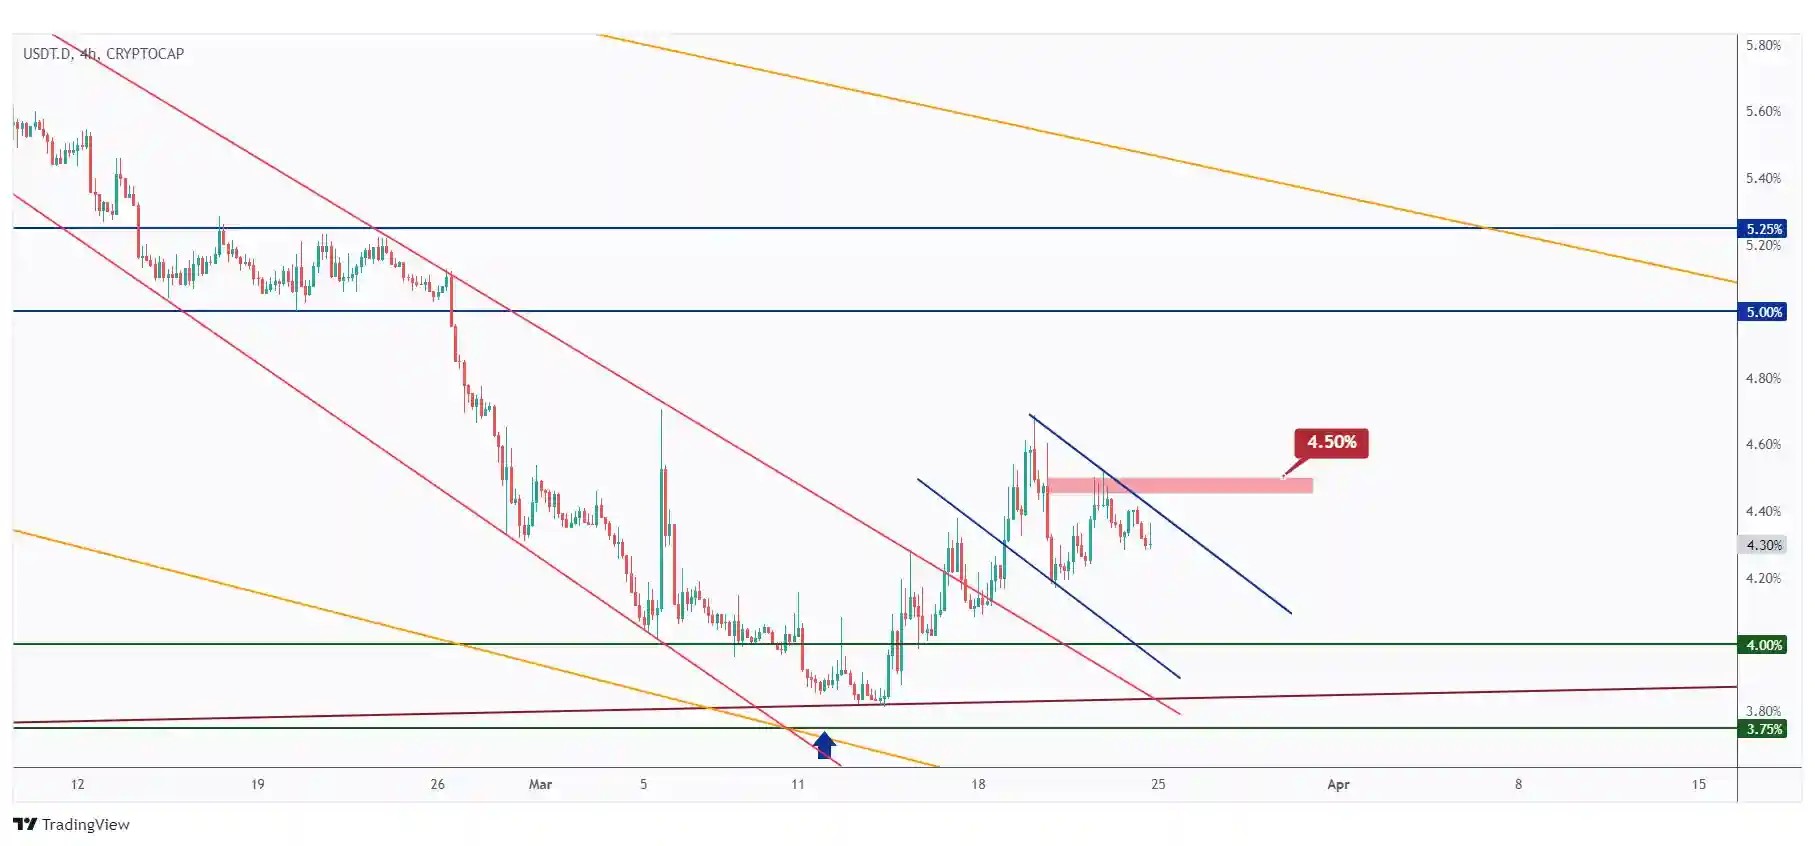 USDT.D 4h chart overall bearish trading within the falling channel as long as the 4.5% high holds.